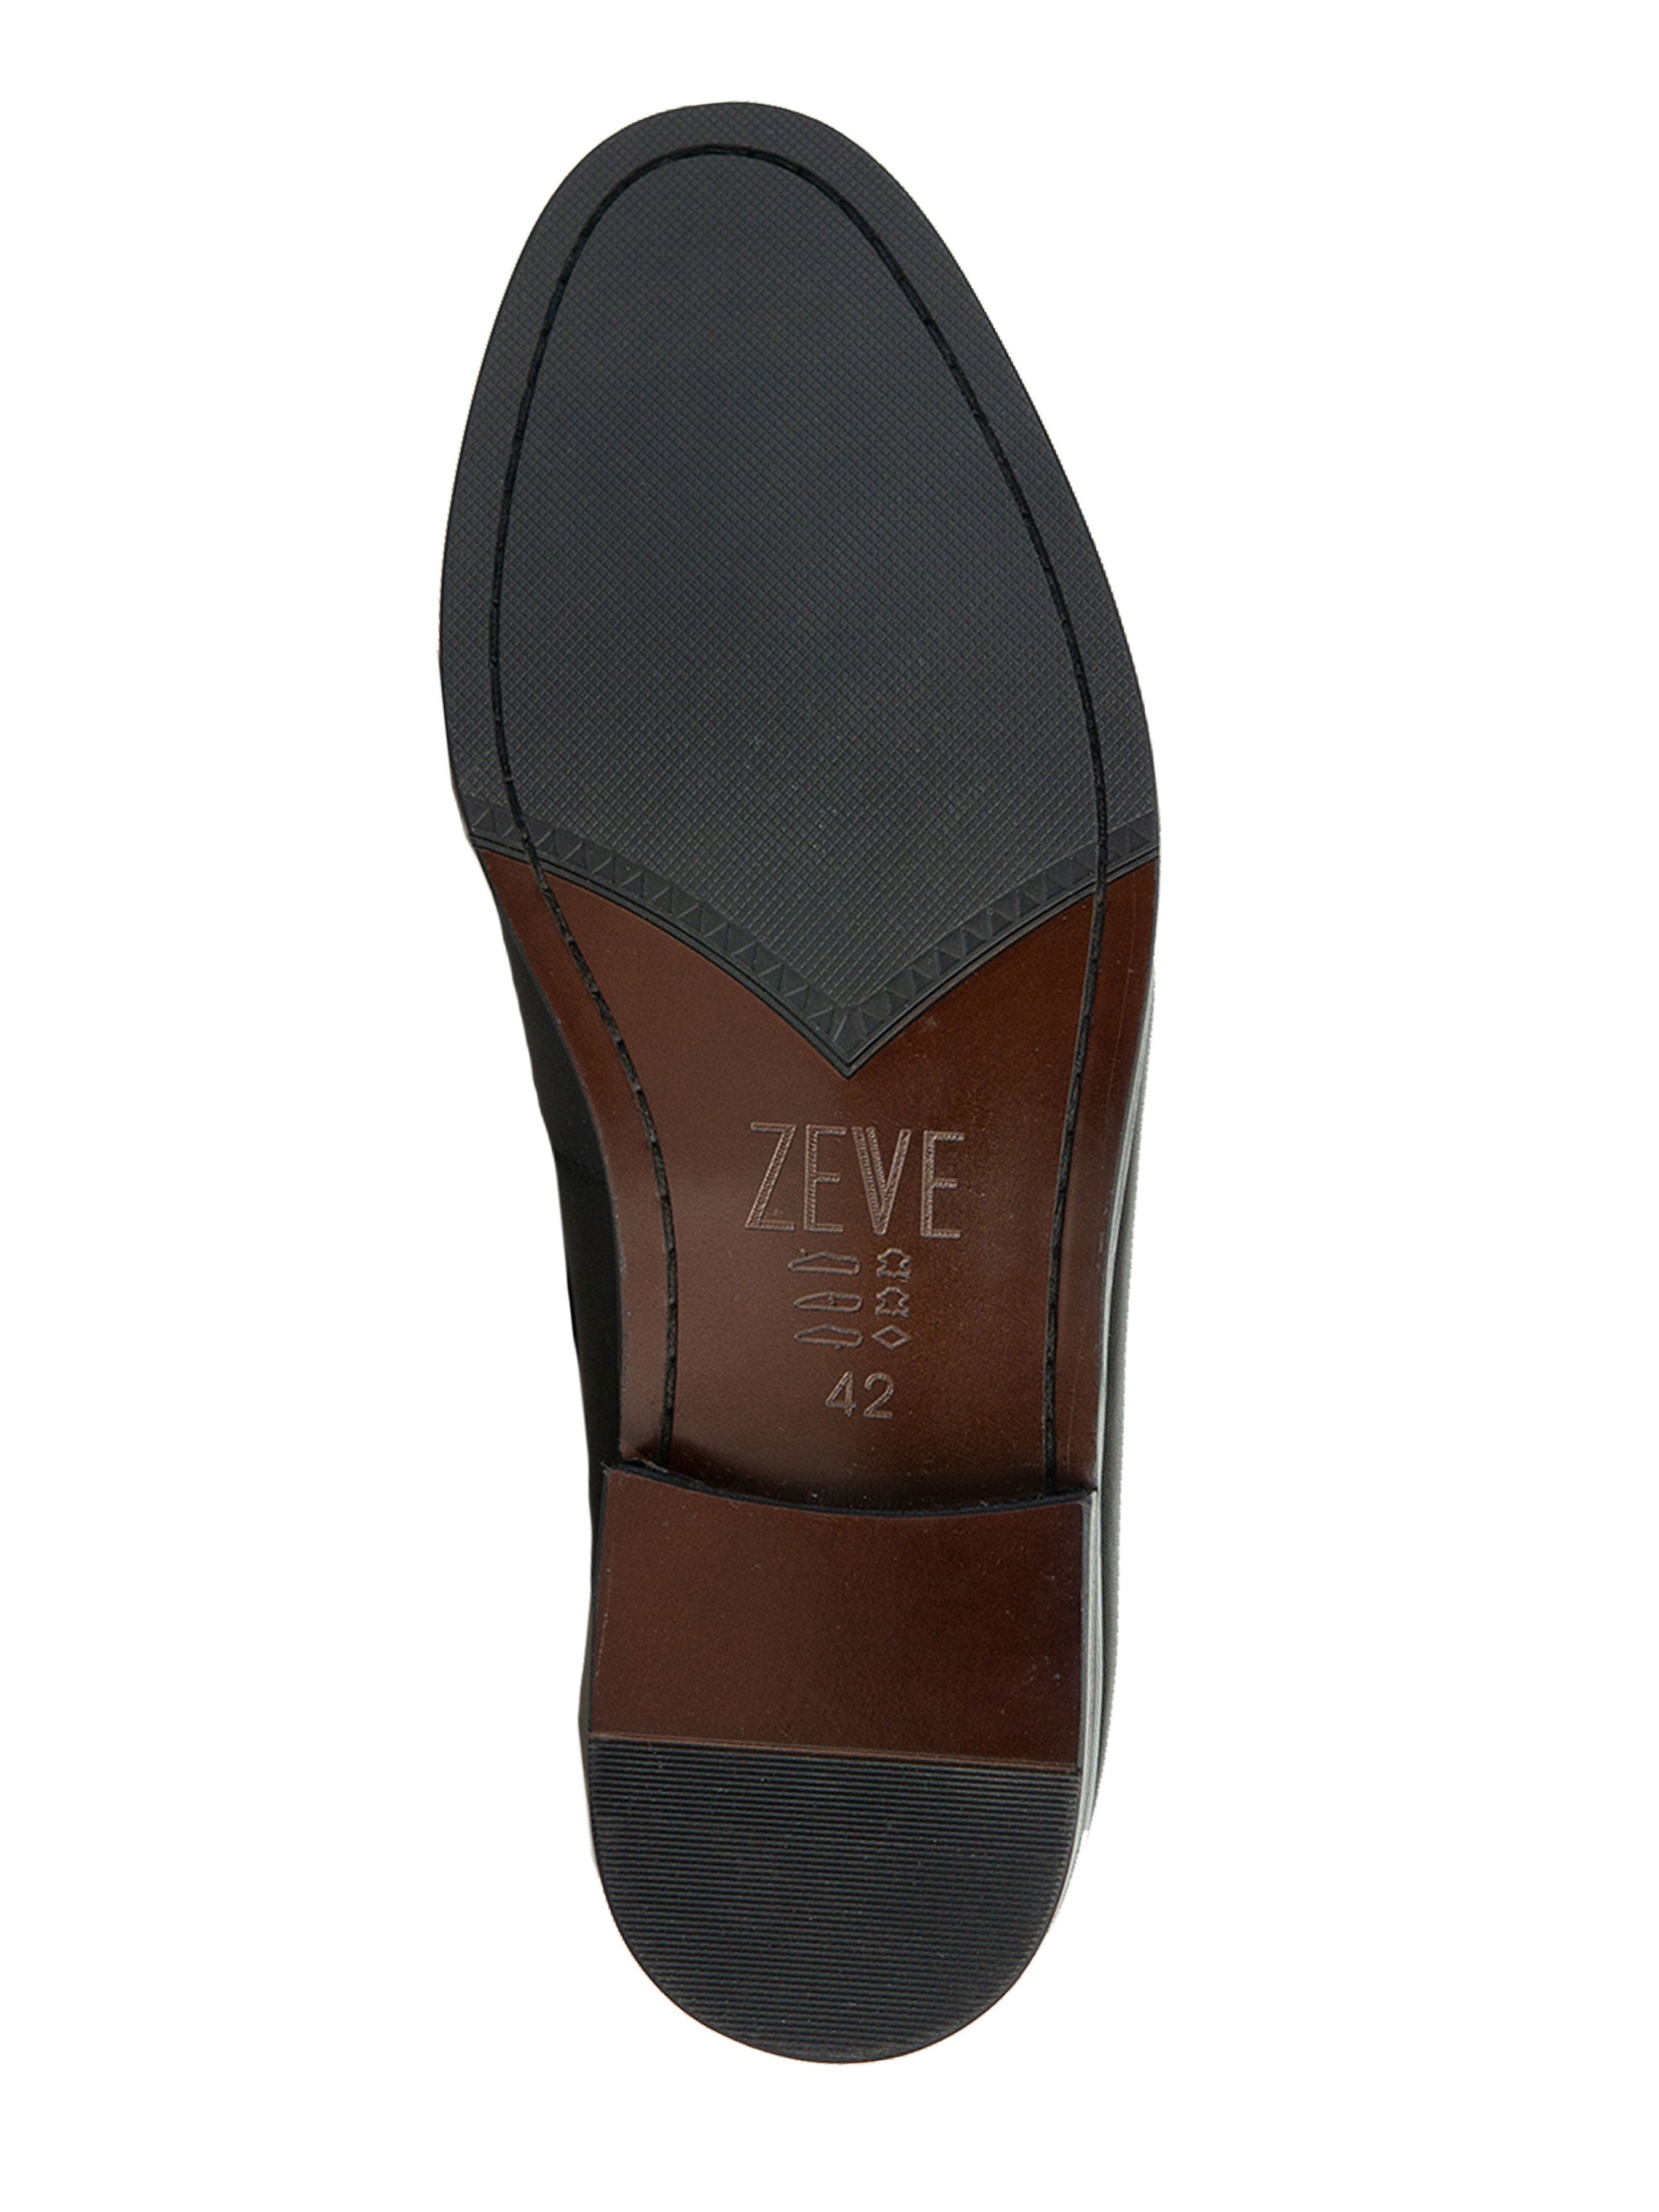 Belgian Loafer - Black Grey Croco Double Monk Strap (Hand Painted Patina) - Zeve Shoes